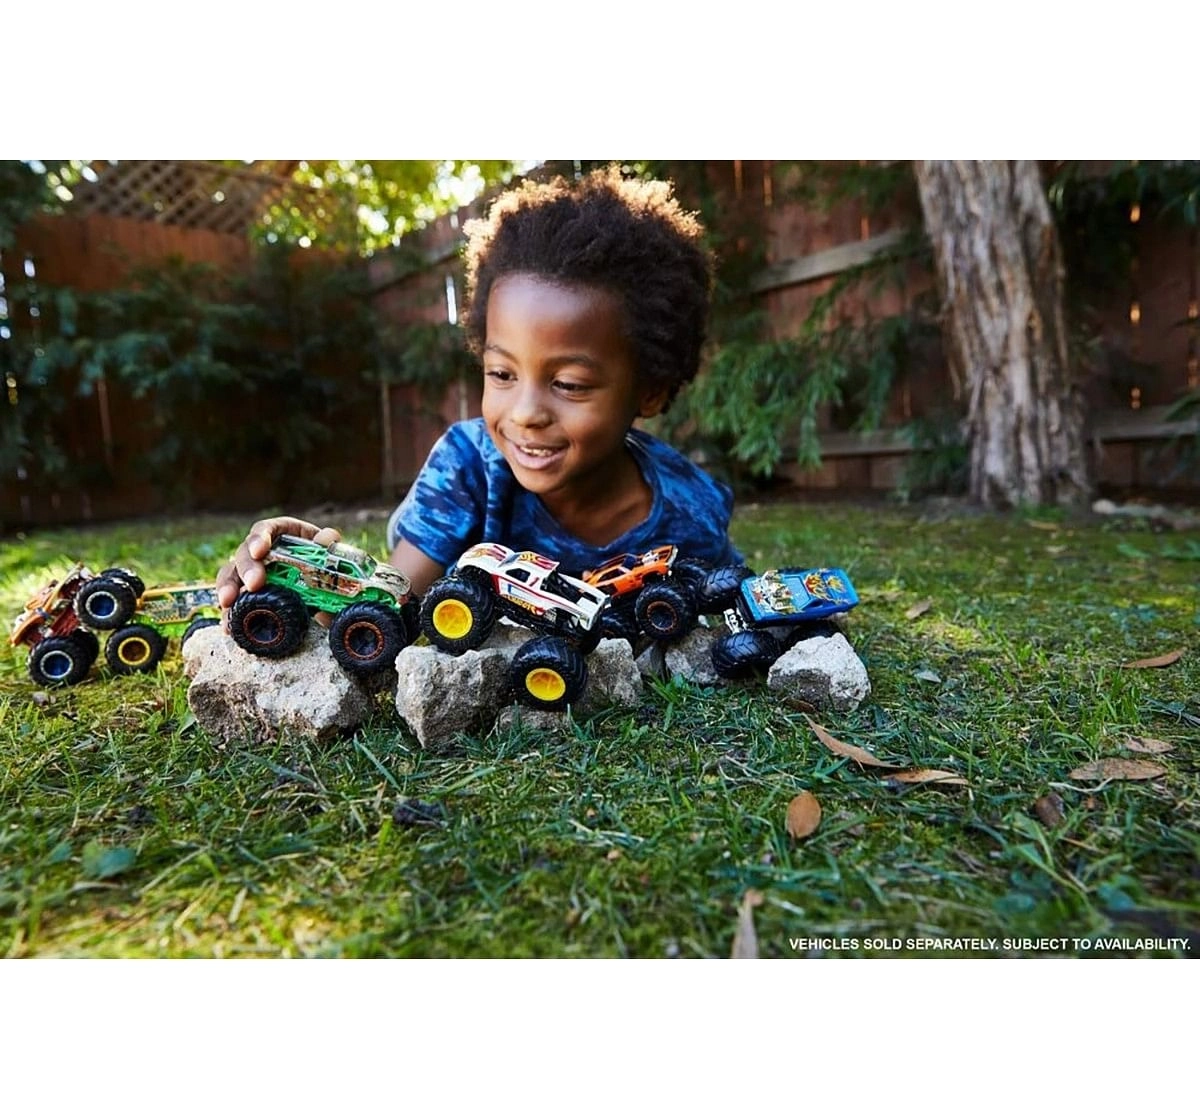 Hot Wheels 1:64 Monster Trucks Demolition Doubles Pack of 2 Vehicles for Kids age 3Y+, Assorted